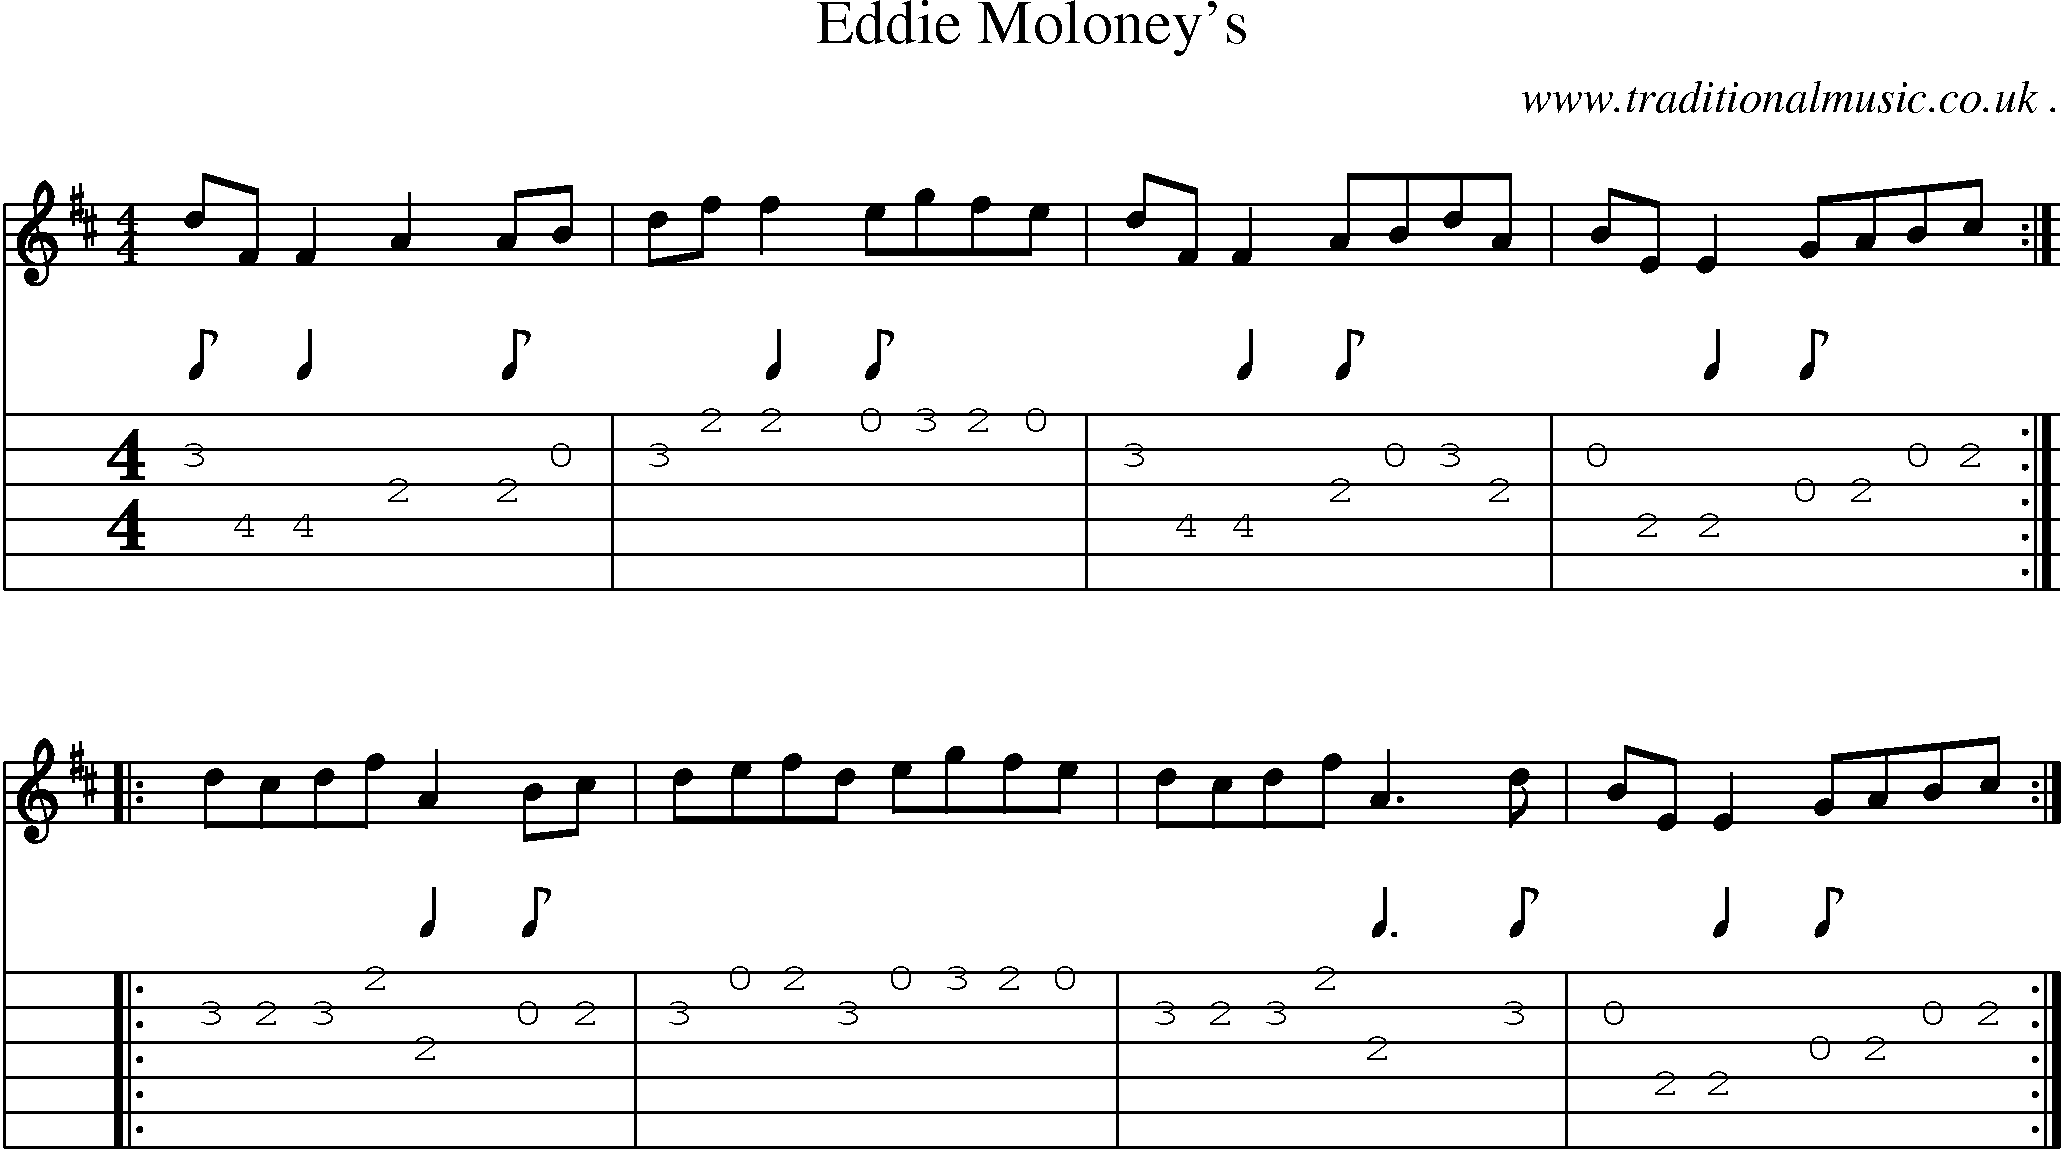 Sheet-Music and Guitar Tabs for Eddie Moloneys